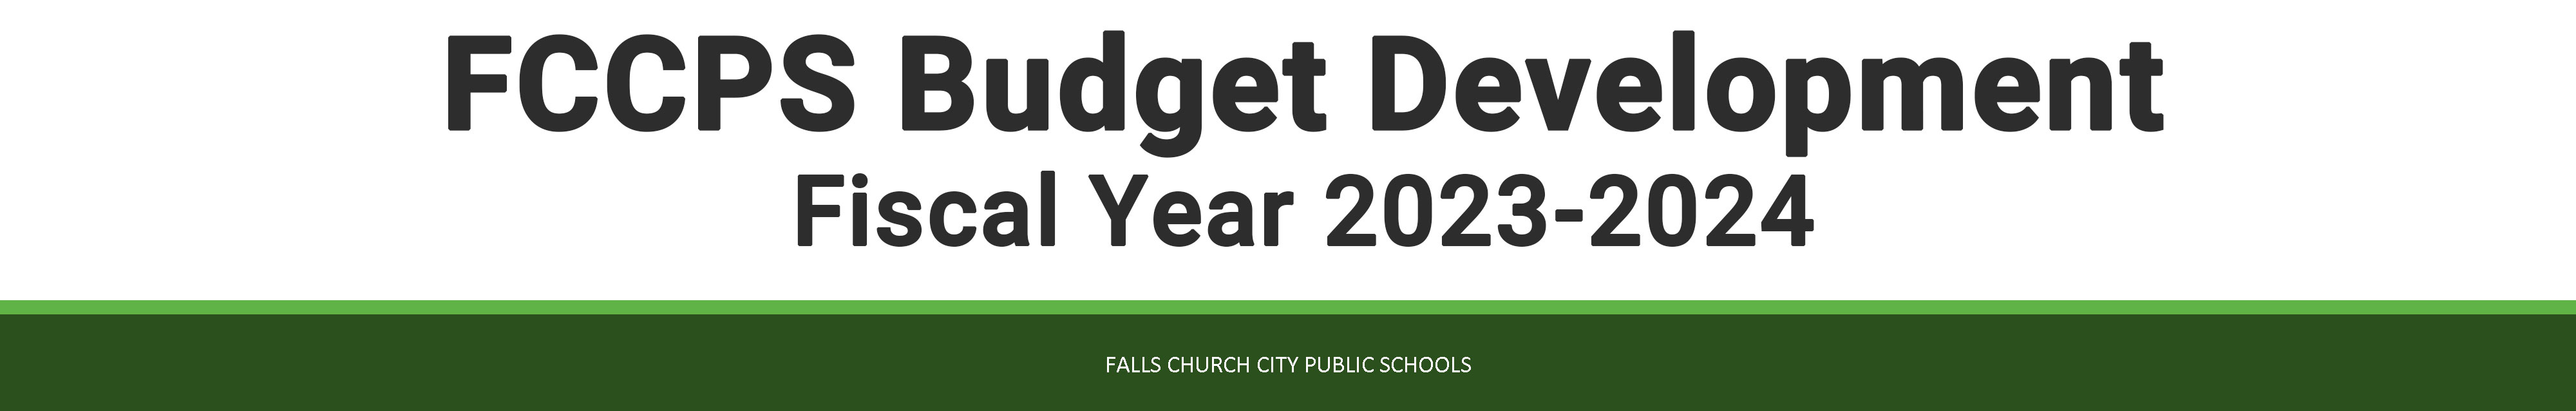 Falls Church City Public Schools Budget Development page for Fiscal Year 2023-2024